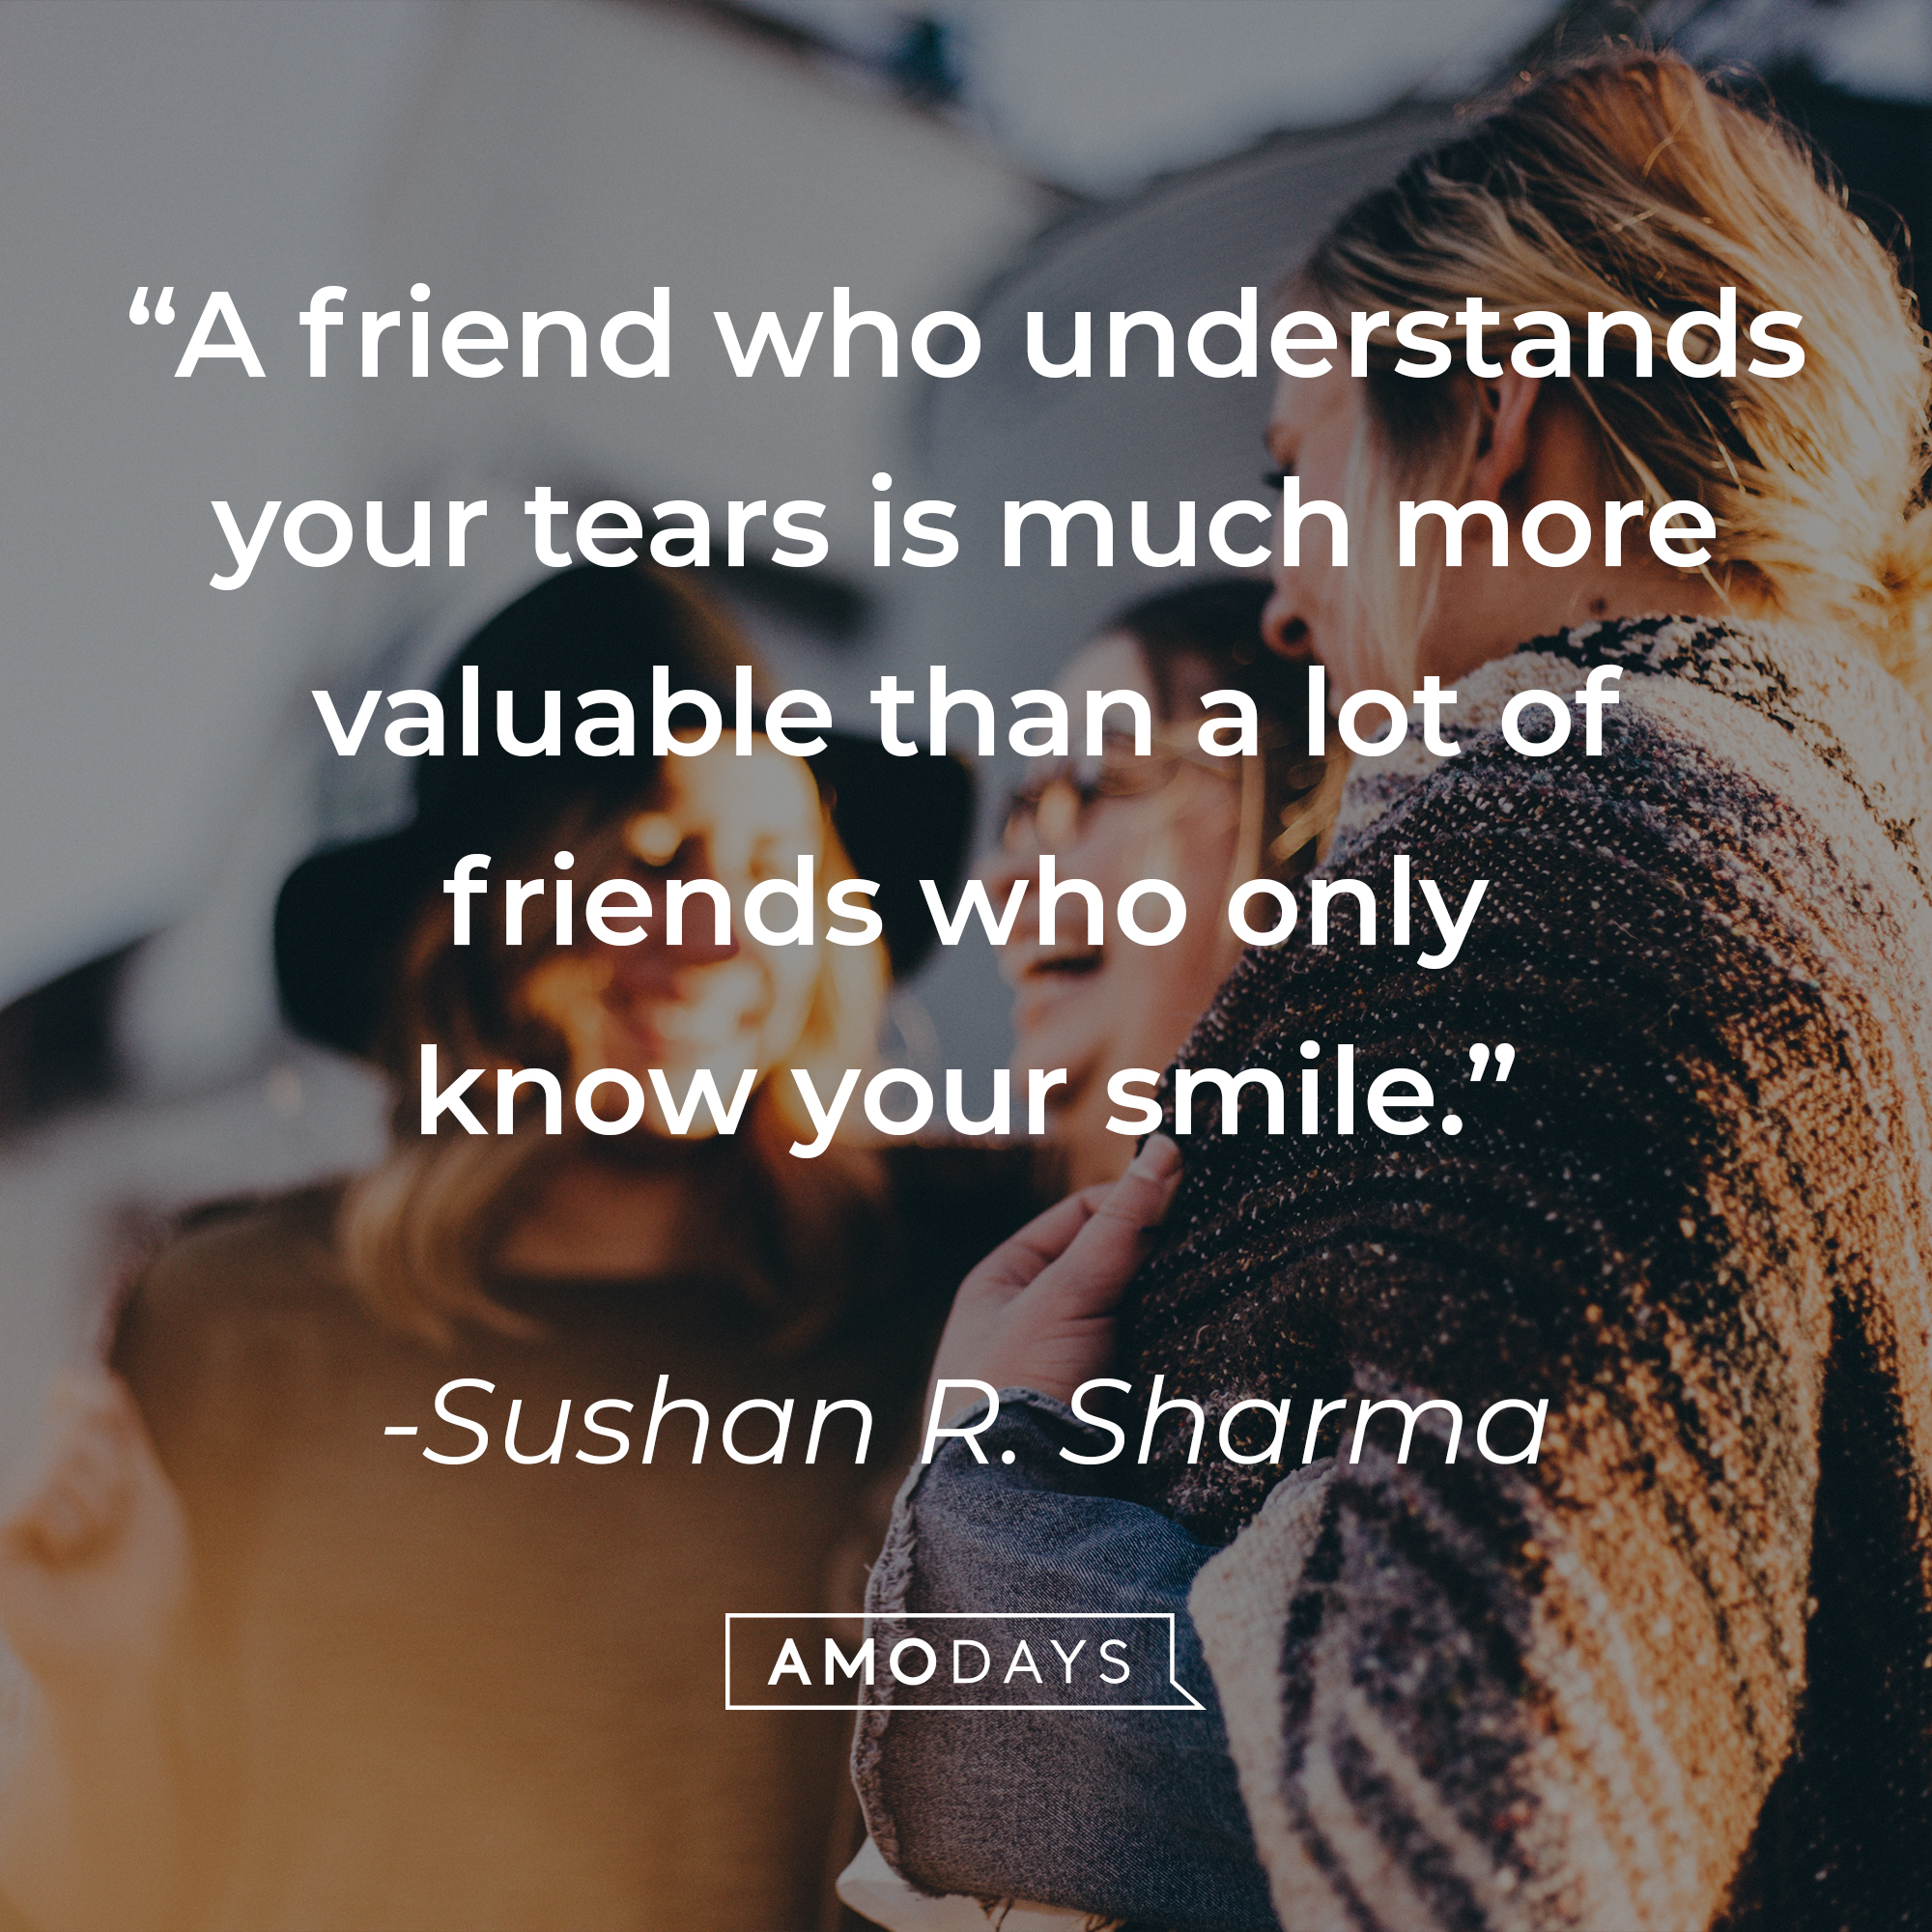 Sushan R. Sharma's quote: "A friend who understands your tears is much more valuable than a lot of friends who only know your smile." | Source: Unsplash